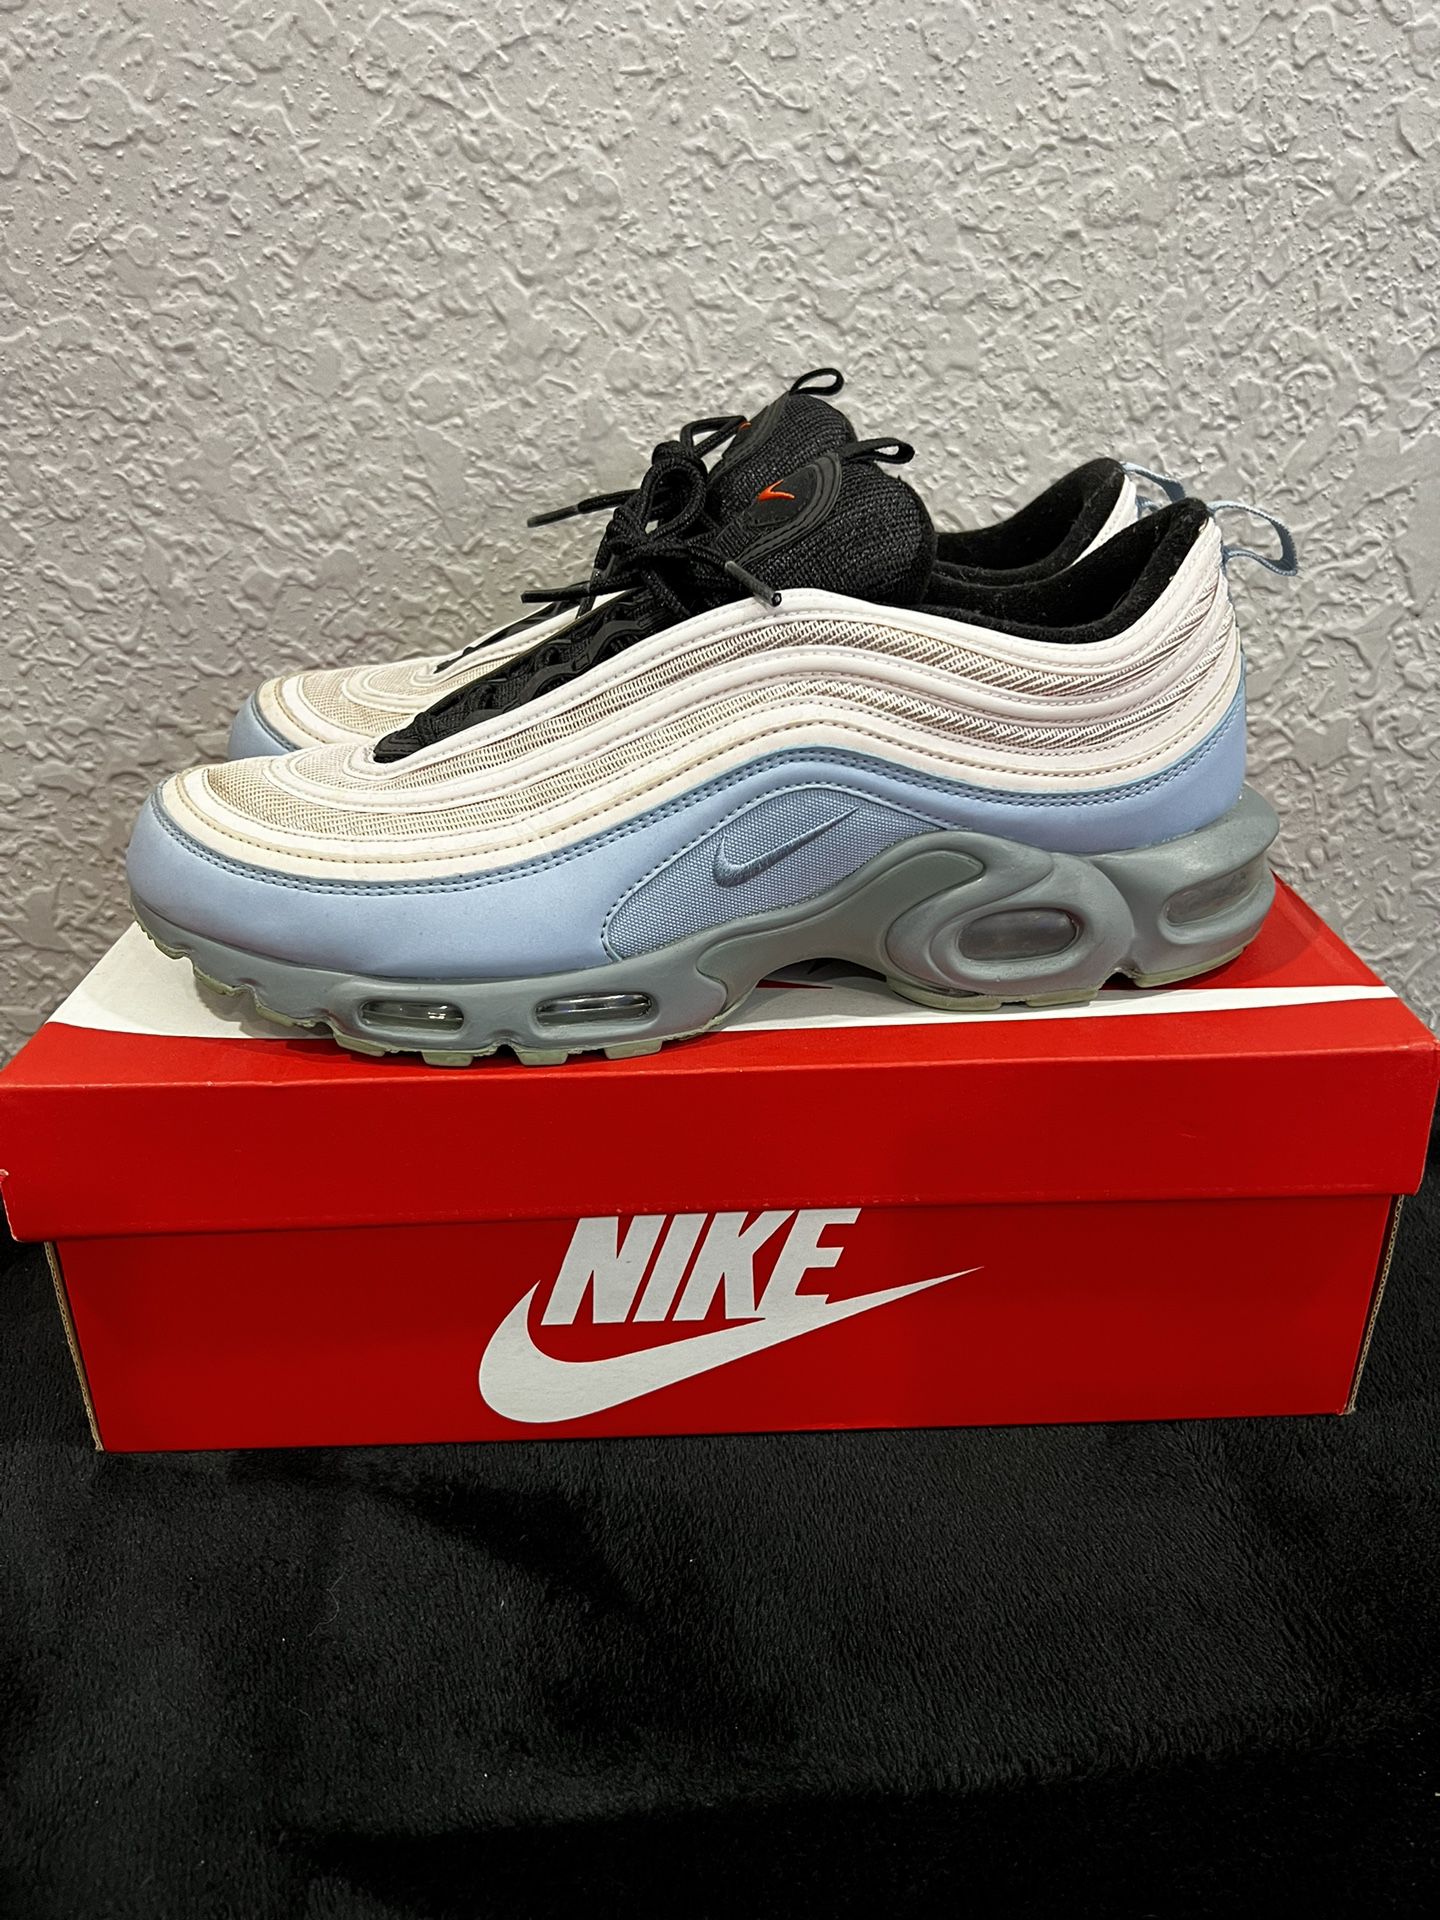 Nike Airmax Plus 97 Cake for Sale in Lake Worth, FL - OfferUp